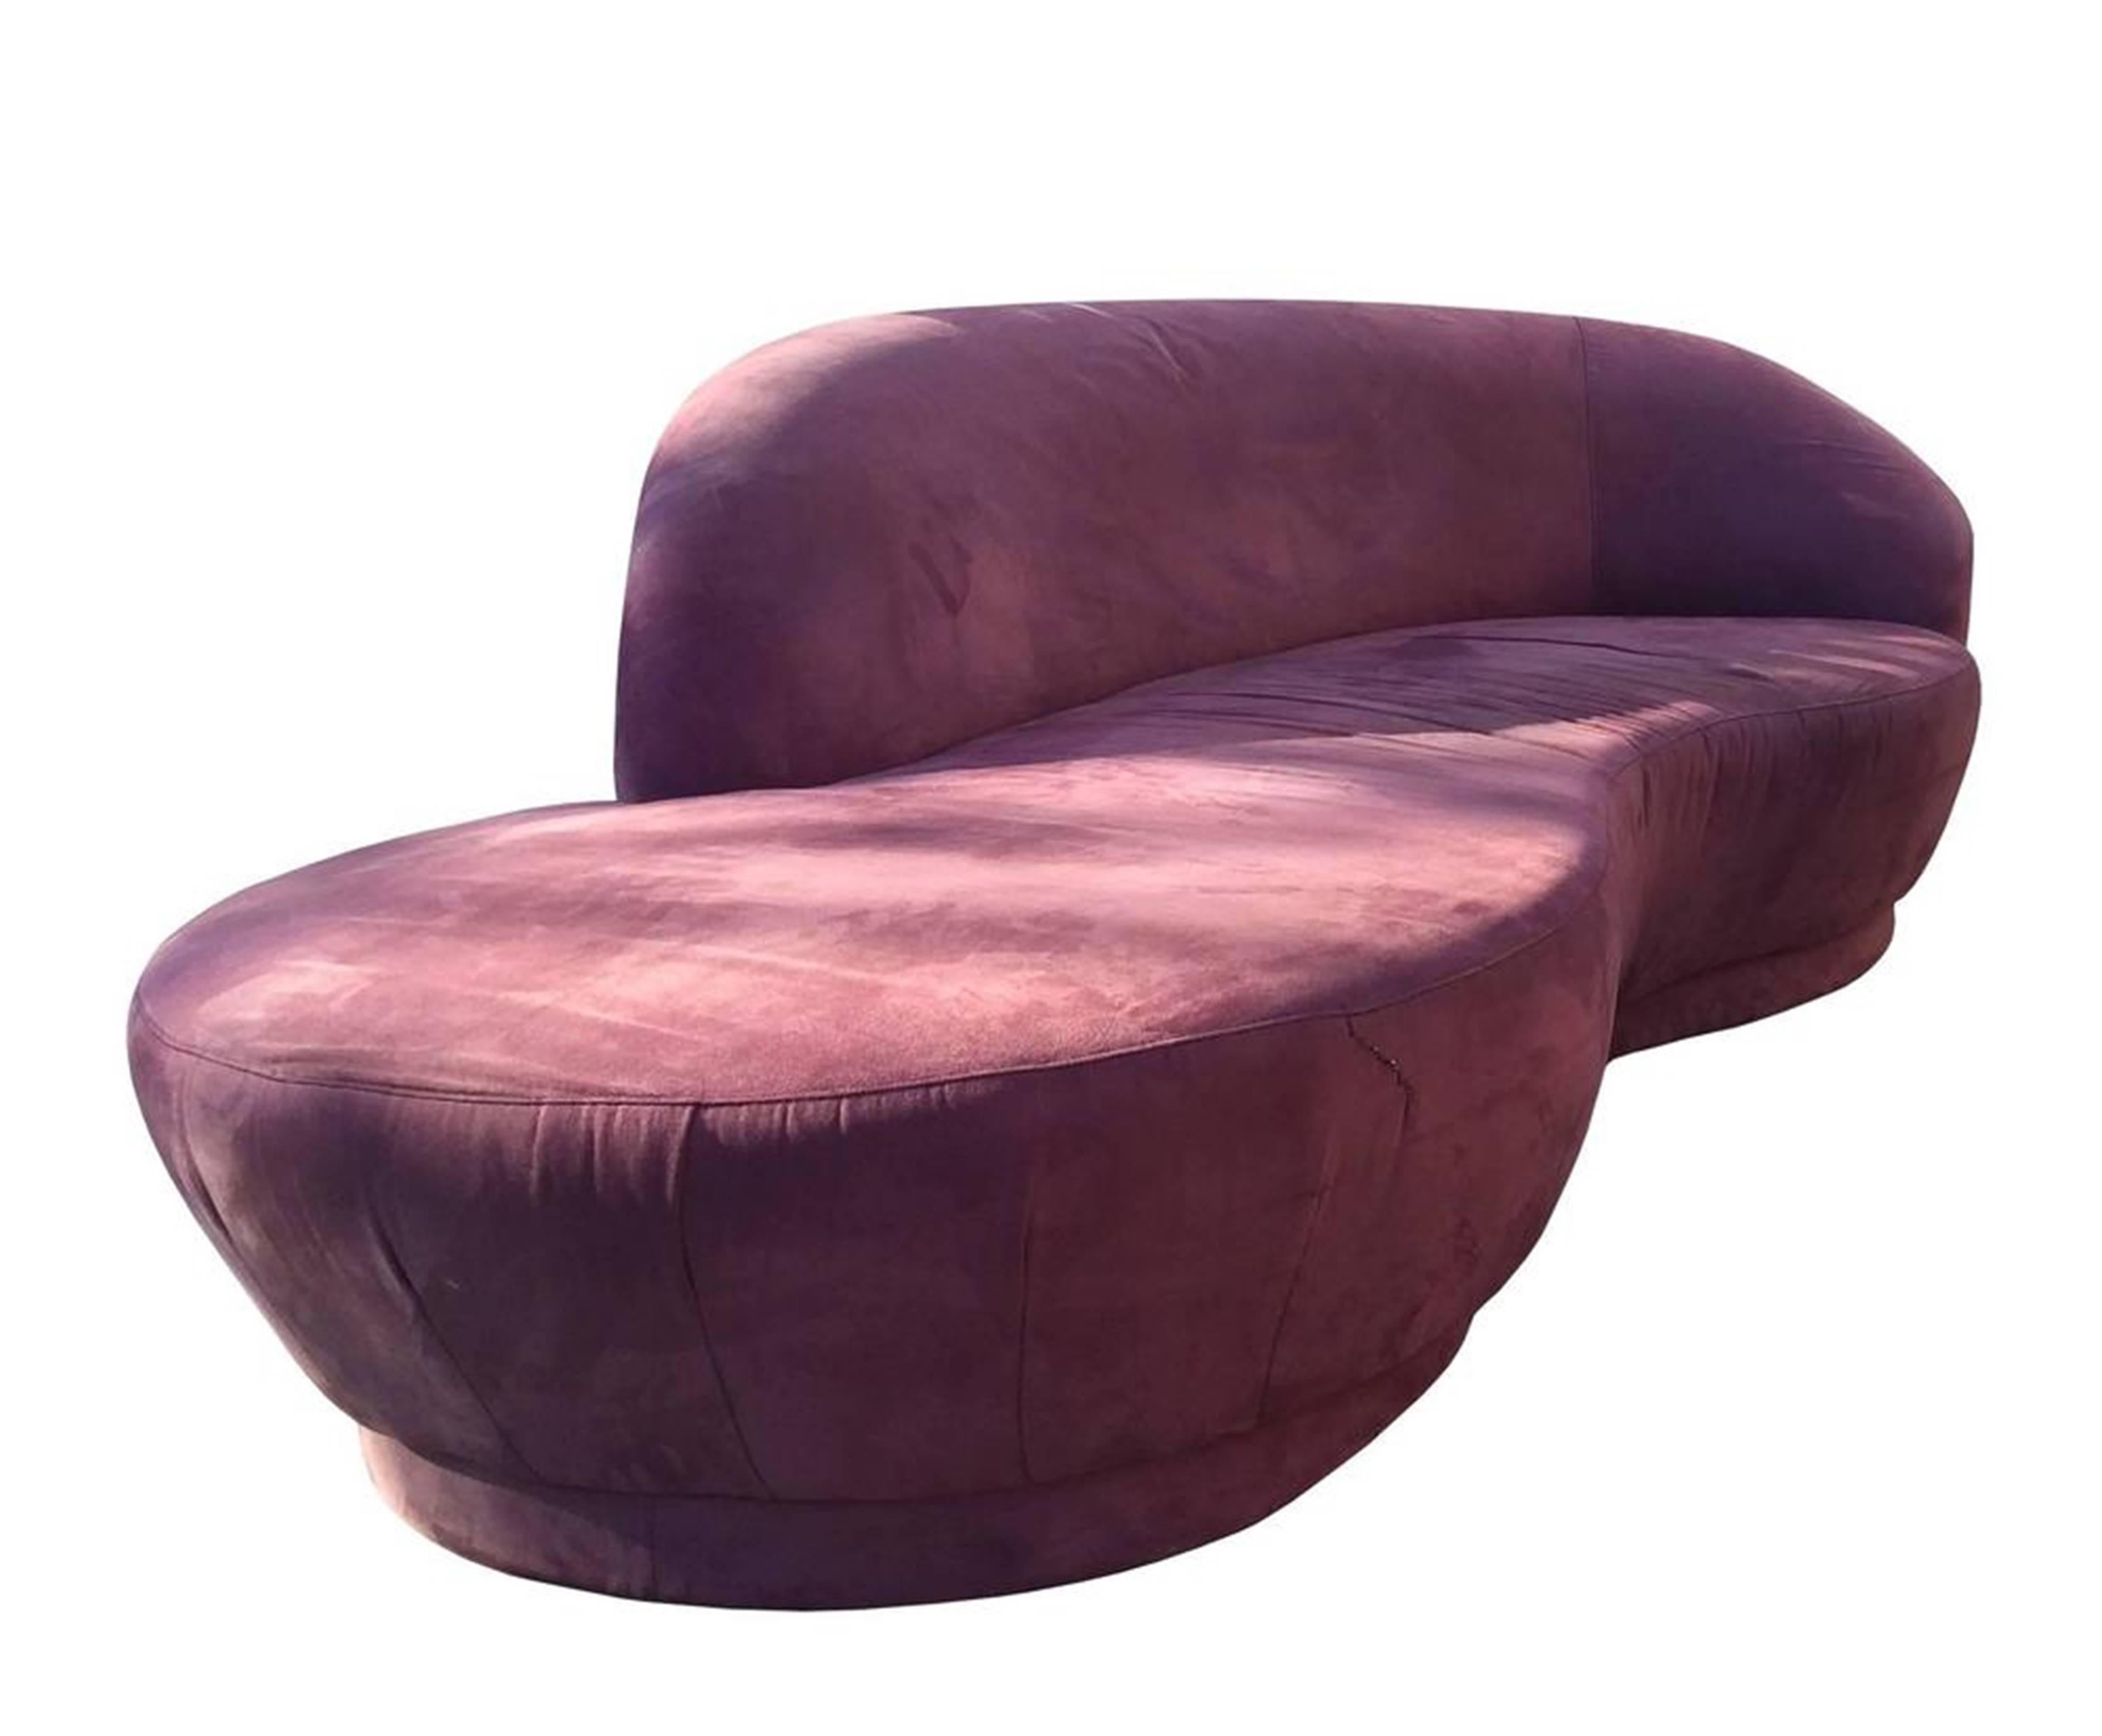 Vintage Vladimir Kagan Serpentine sofa manufactured by Weiman Preview.

The sofa need to be reupholstered, the fabric has rips, fading and soiling, must be reupholstered.

Measurements:
 96